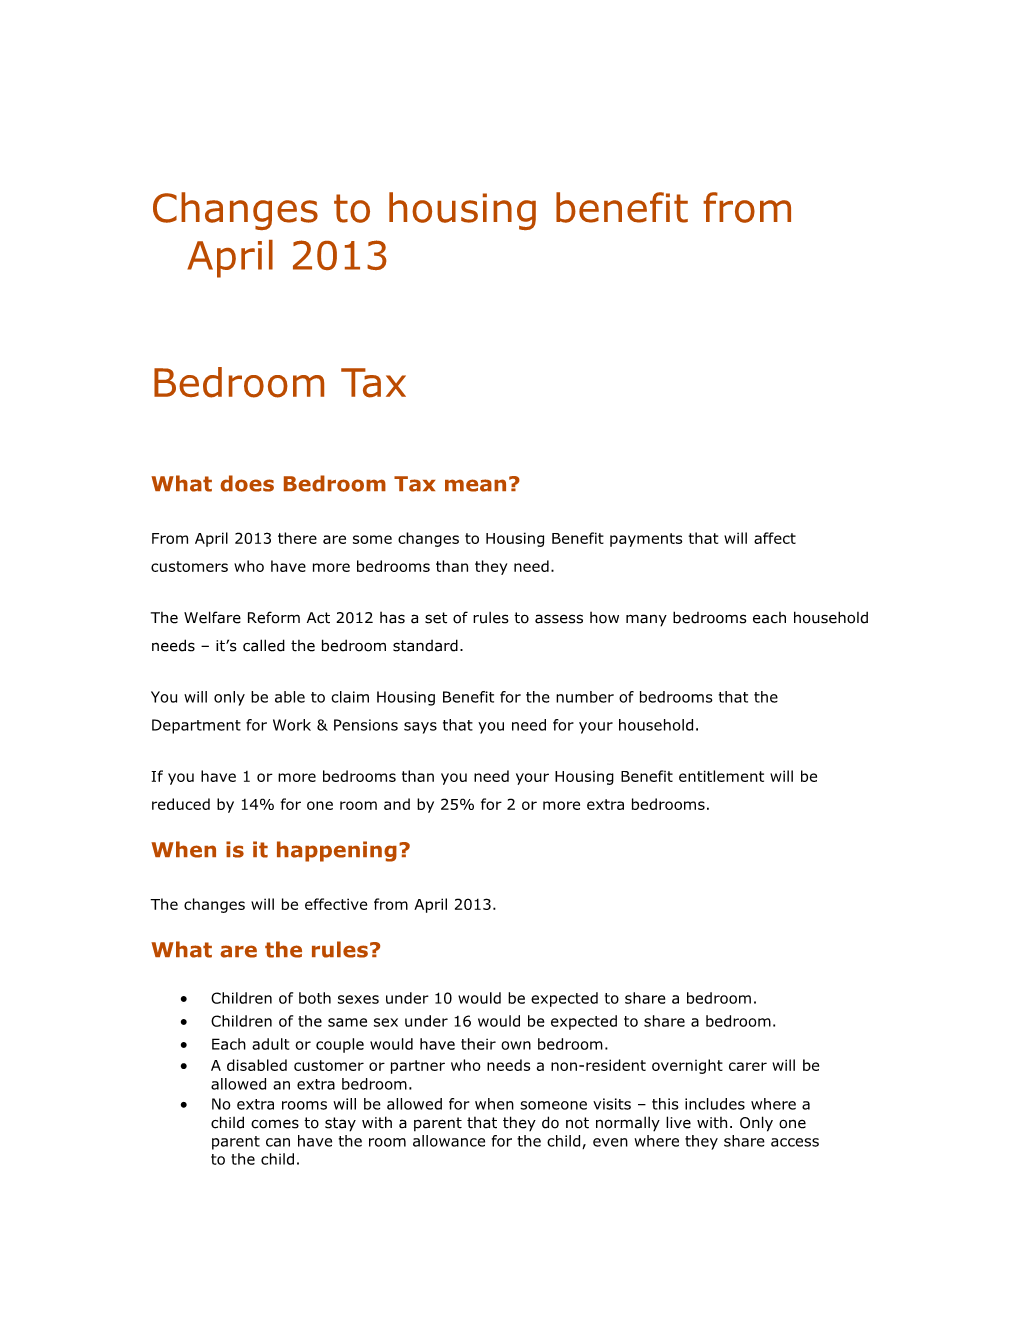 Changes to Housing Benefit from April 2013